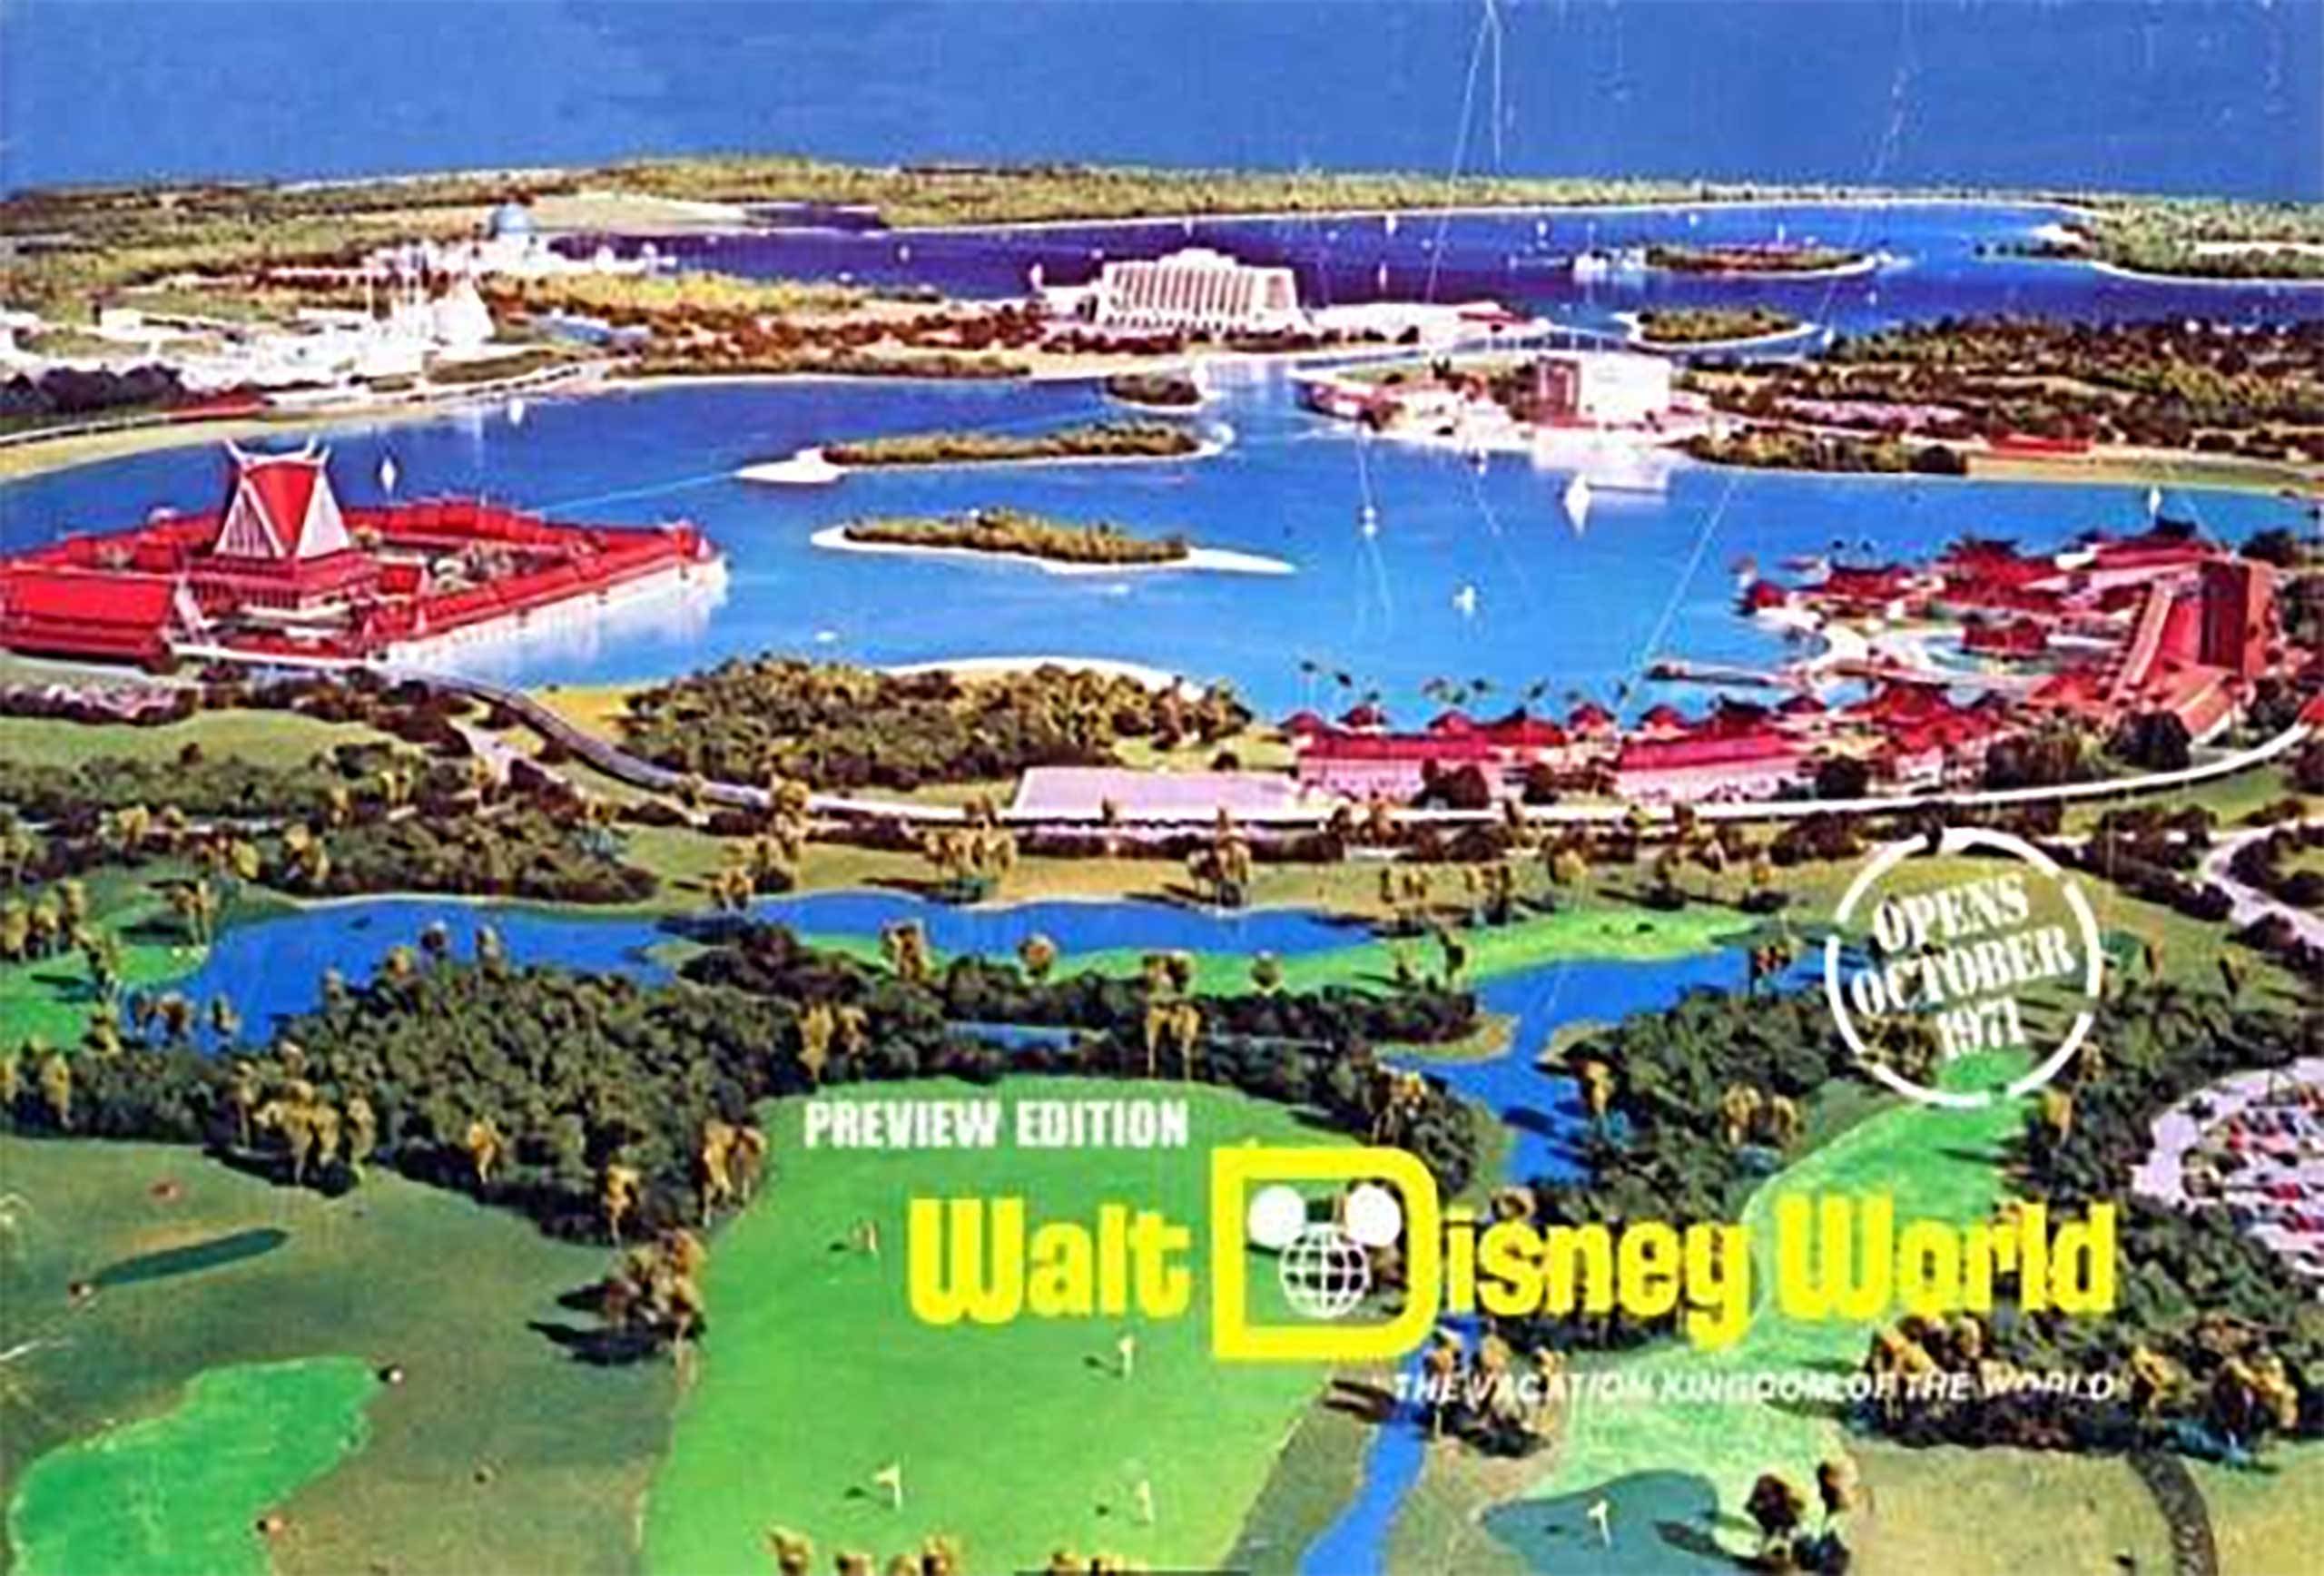 Activity on the most prized piece of land at Walt Disney World sparks renewed interest in the resurgence of another Magic Kingdom area resort